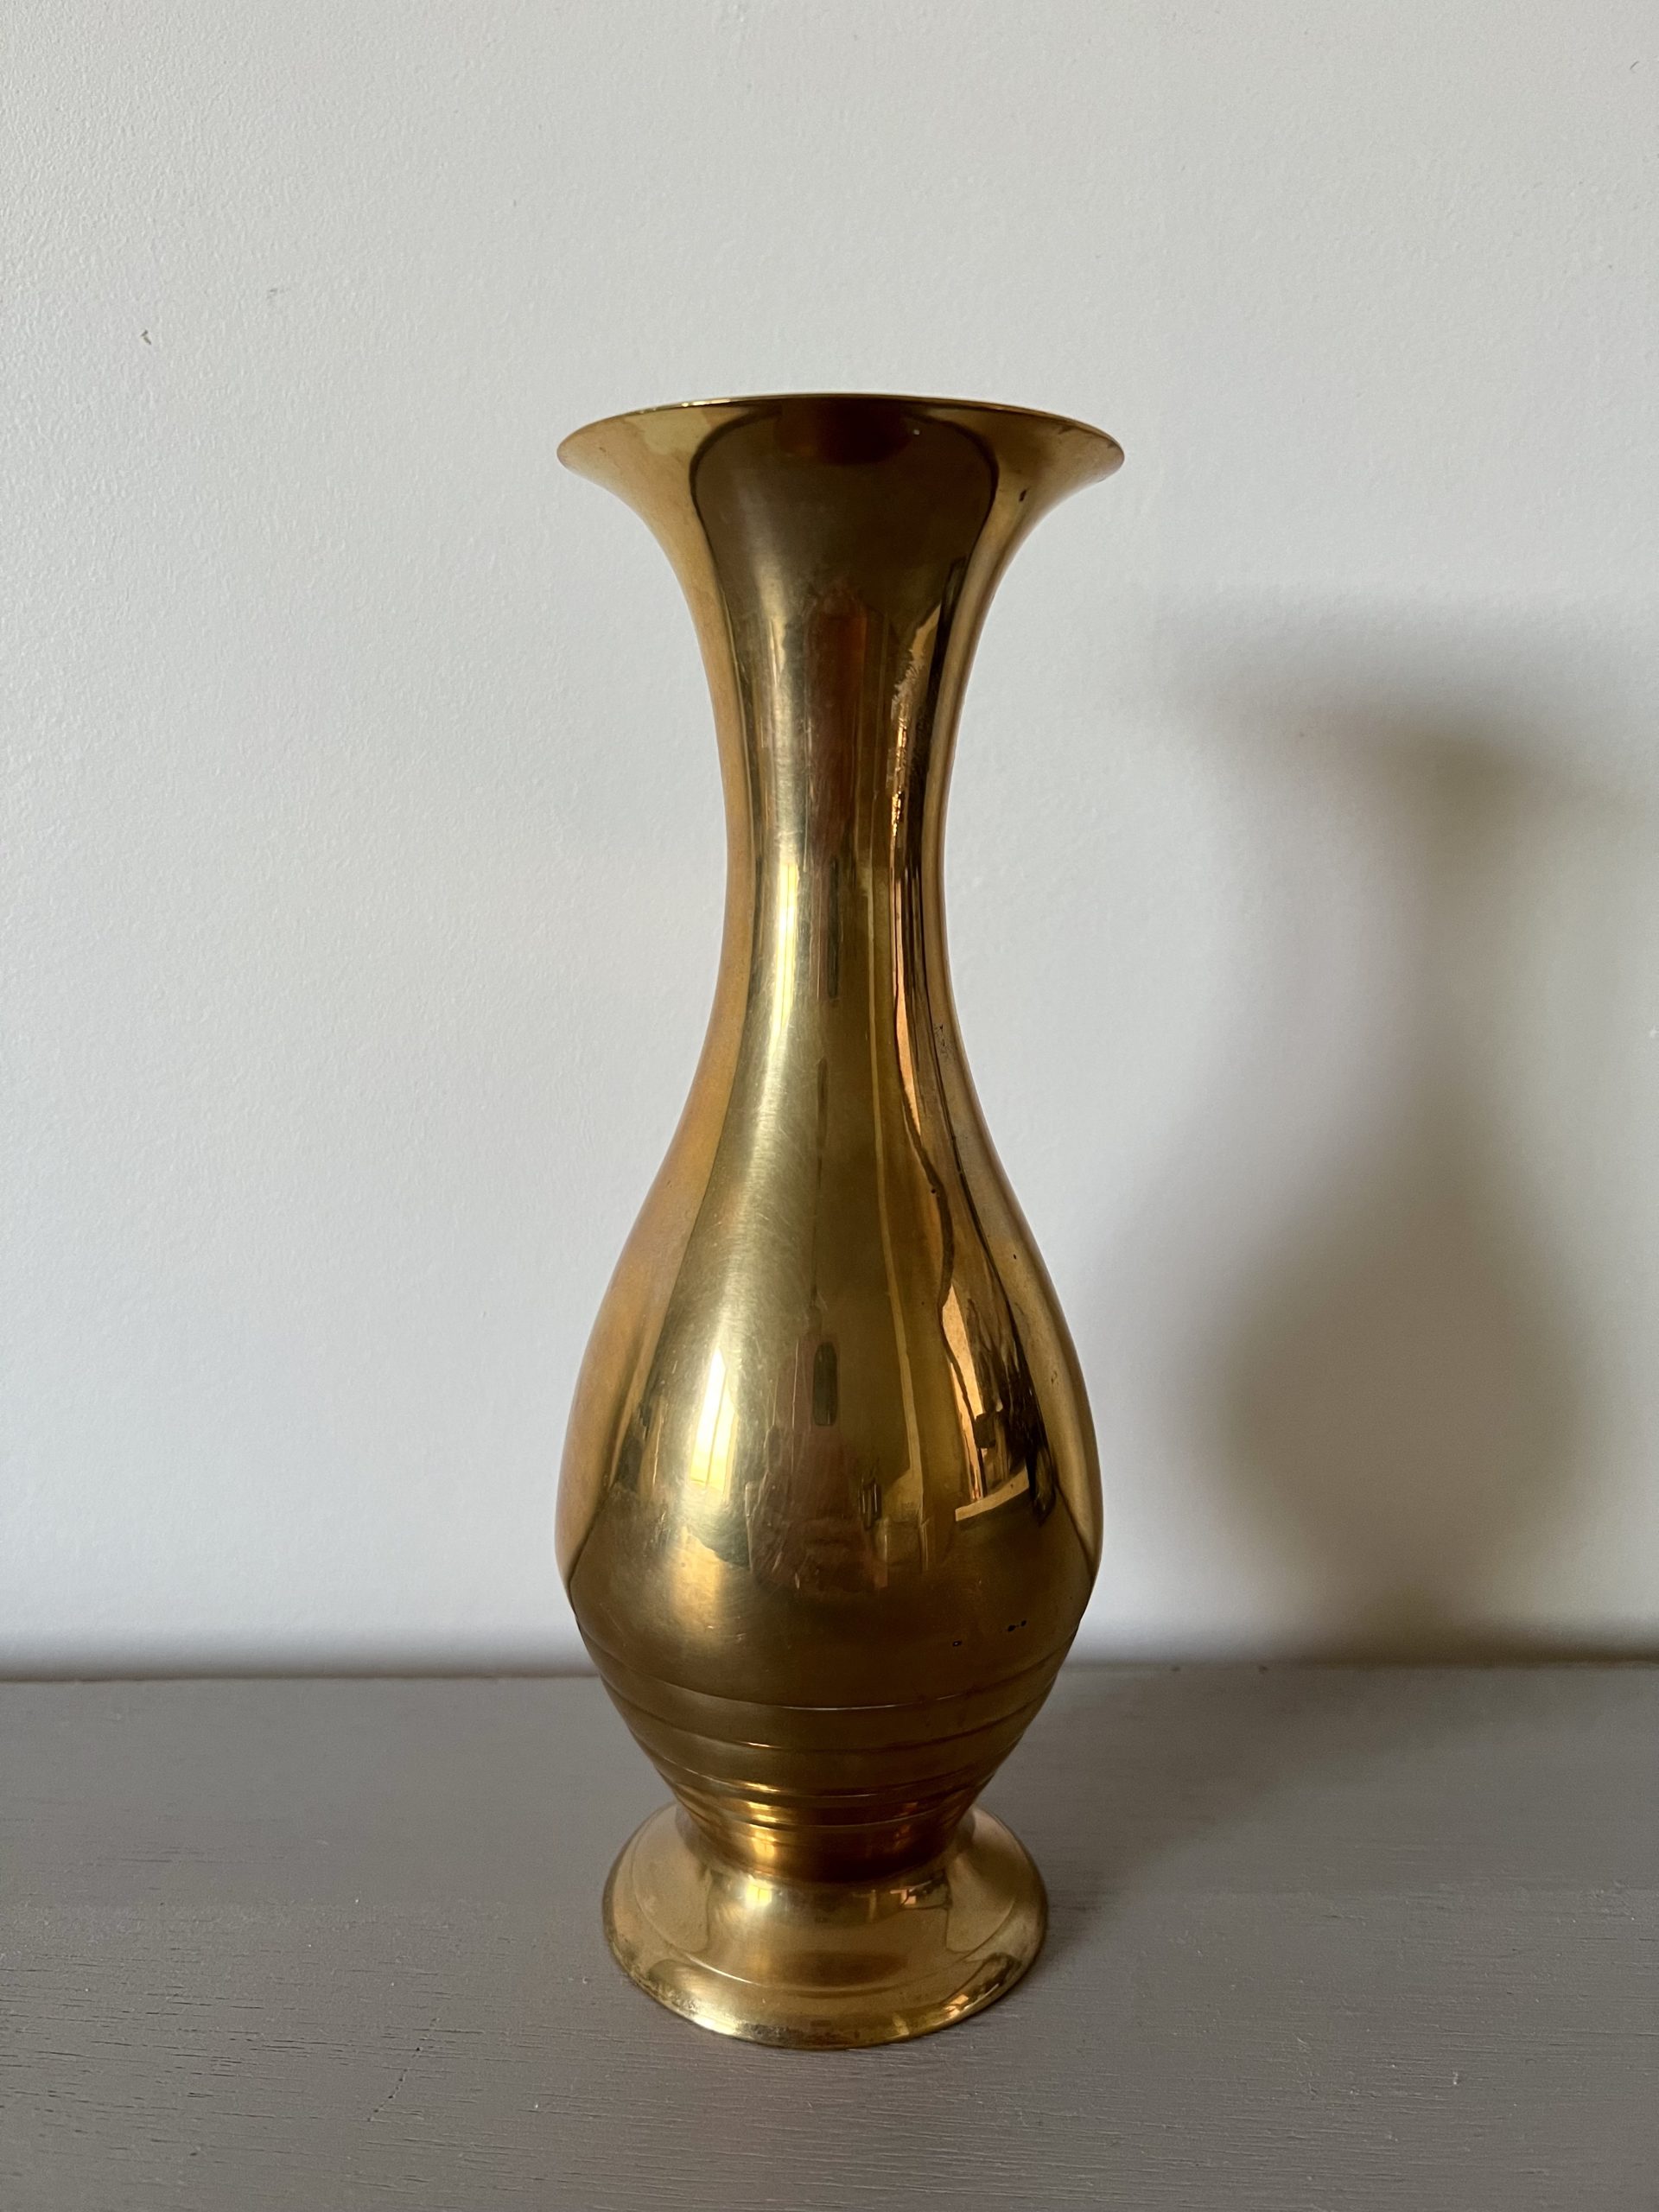 Tall Brass Vase With Intricate Etched Design Vintage Home Decor